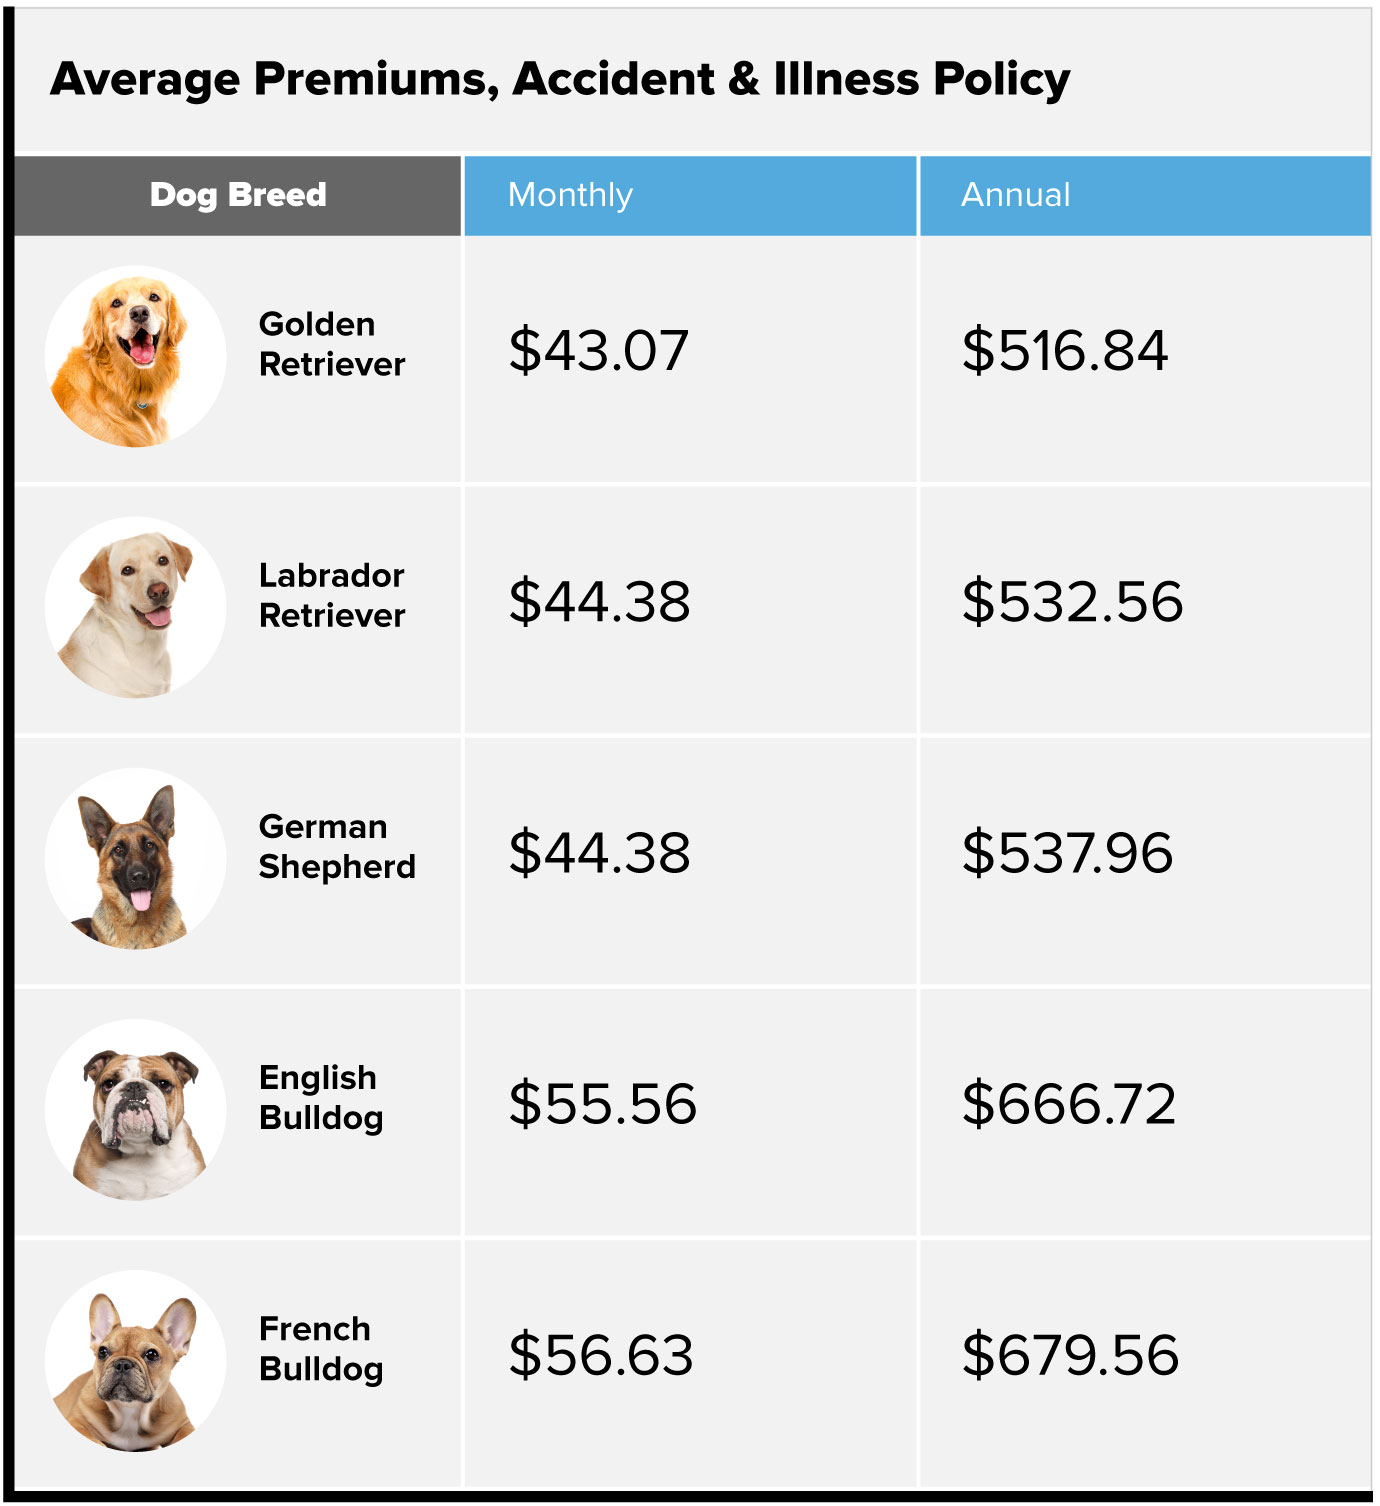 Average premiums, accident and illness policy for dogs chart. Golden retriever $43.07 monthly, $516.84 annually. Labrador retriever $44.38 monthly, $532.56 annually. German shepherd $44.83 monthly, $537.96 annually. English bulldog $55.56 monthly, $666.72 annually. French bulldog, $56.63 monthly, $679.56 annually.